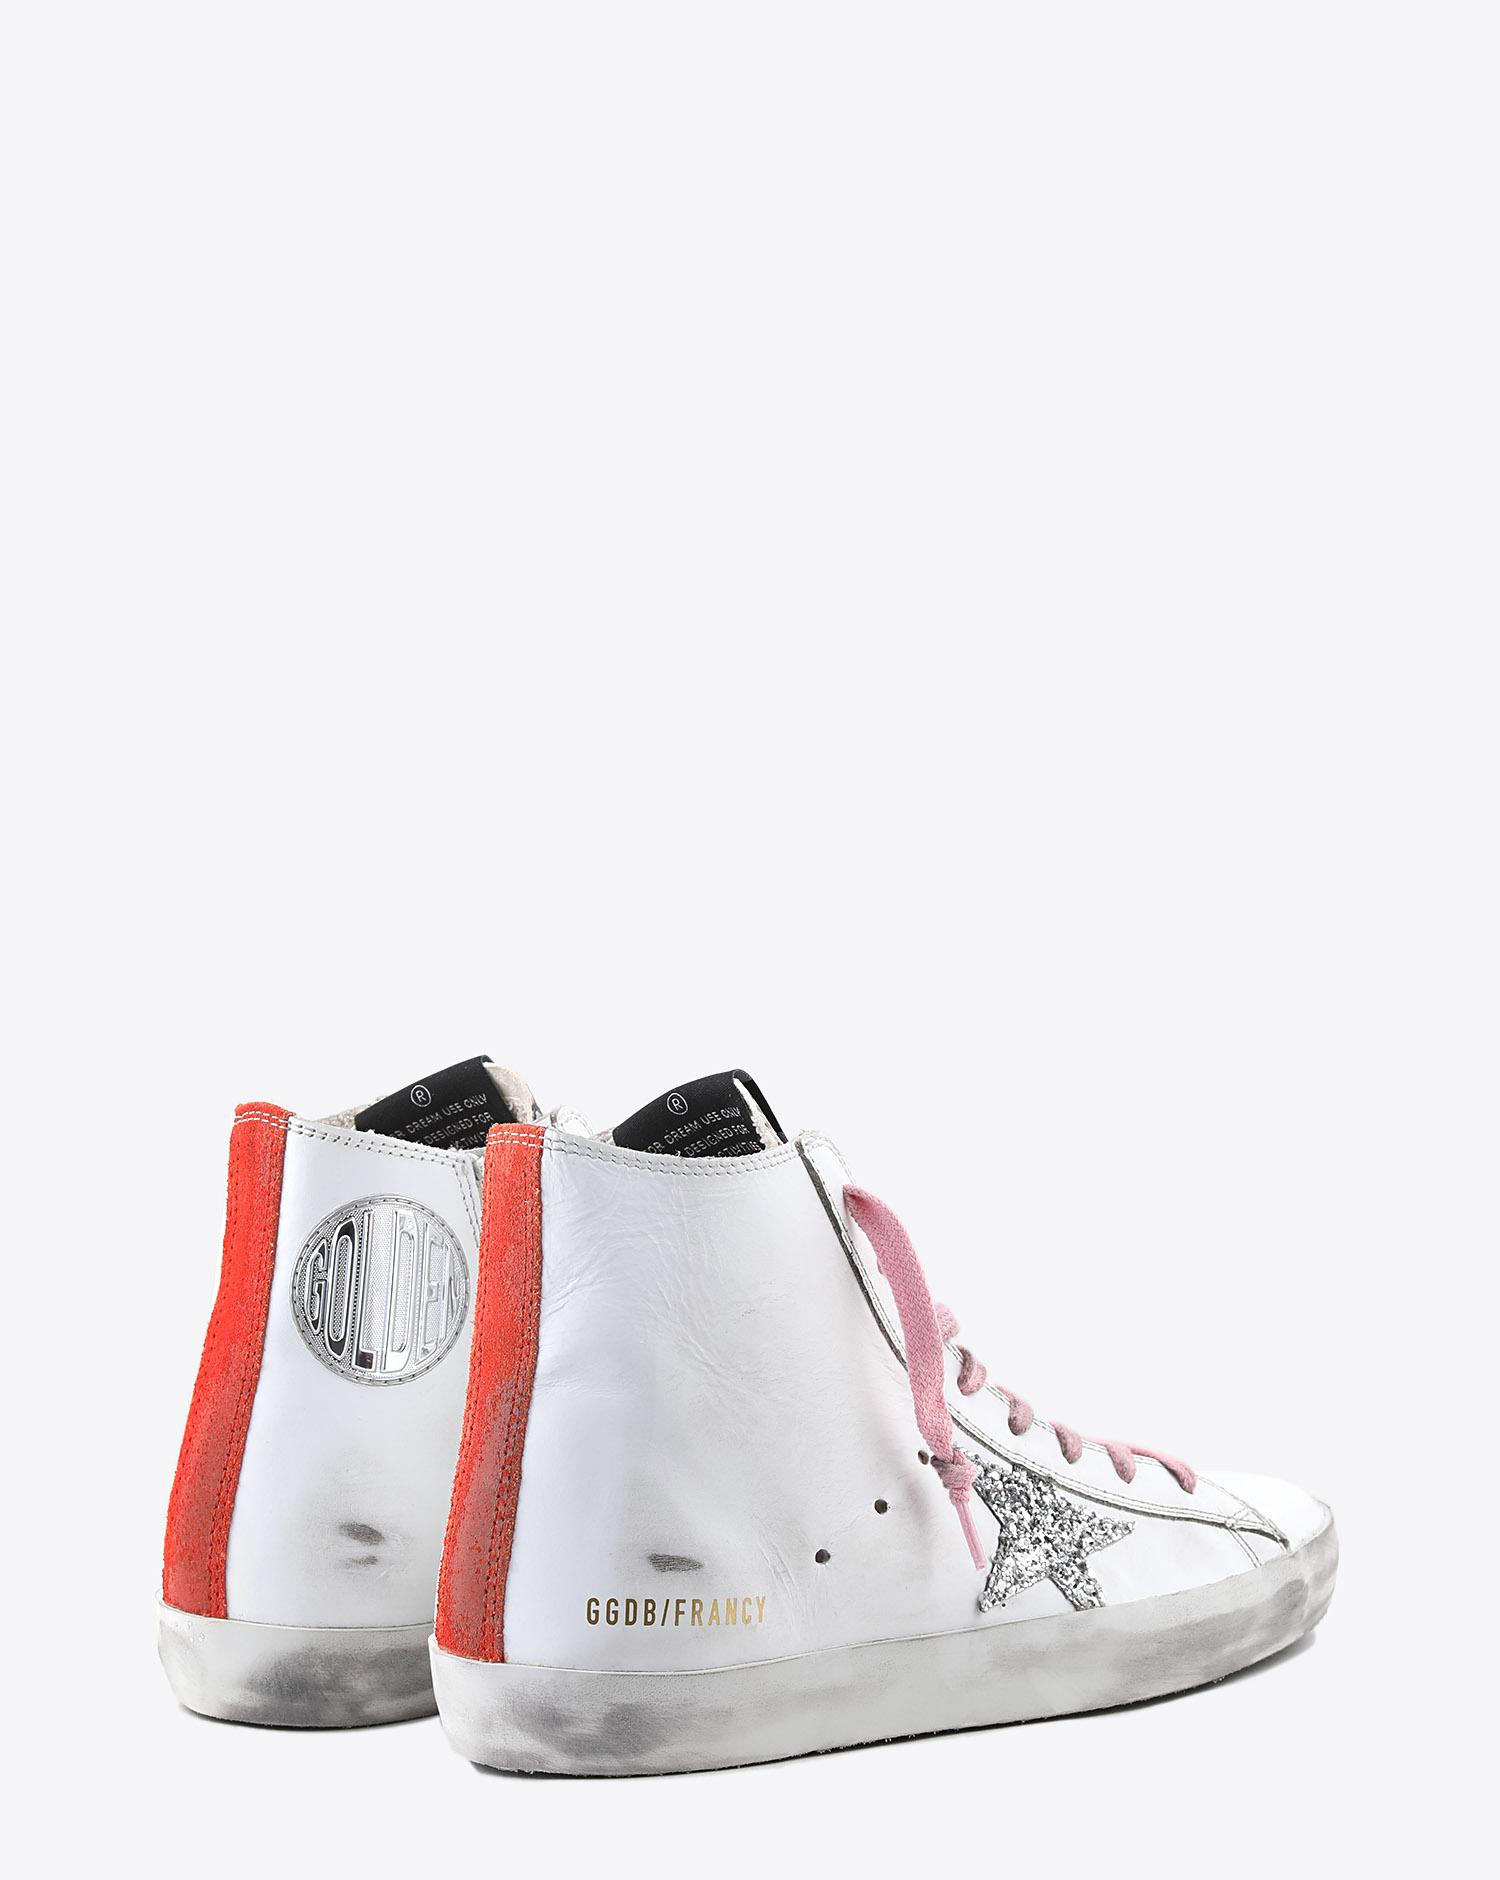 Golden Goose Woman Collection Sneakers Francy - White Leather - Silver Glitter Star  